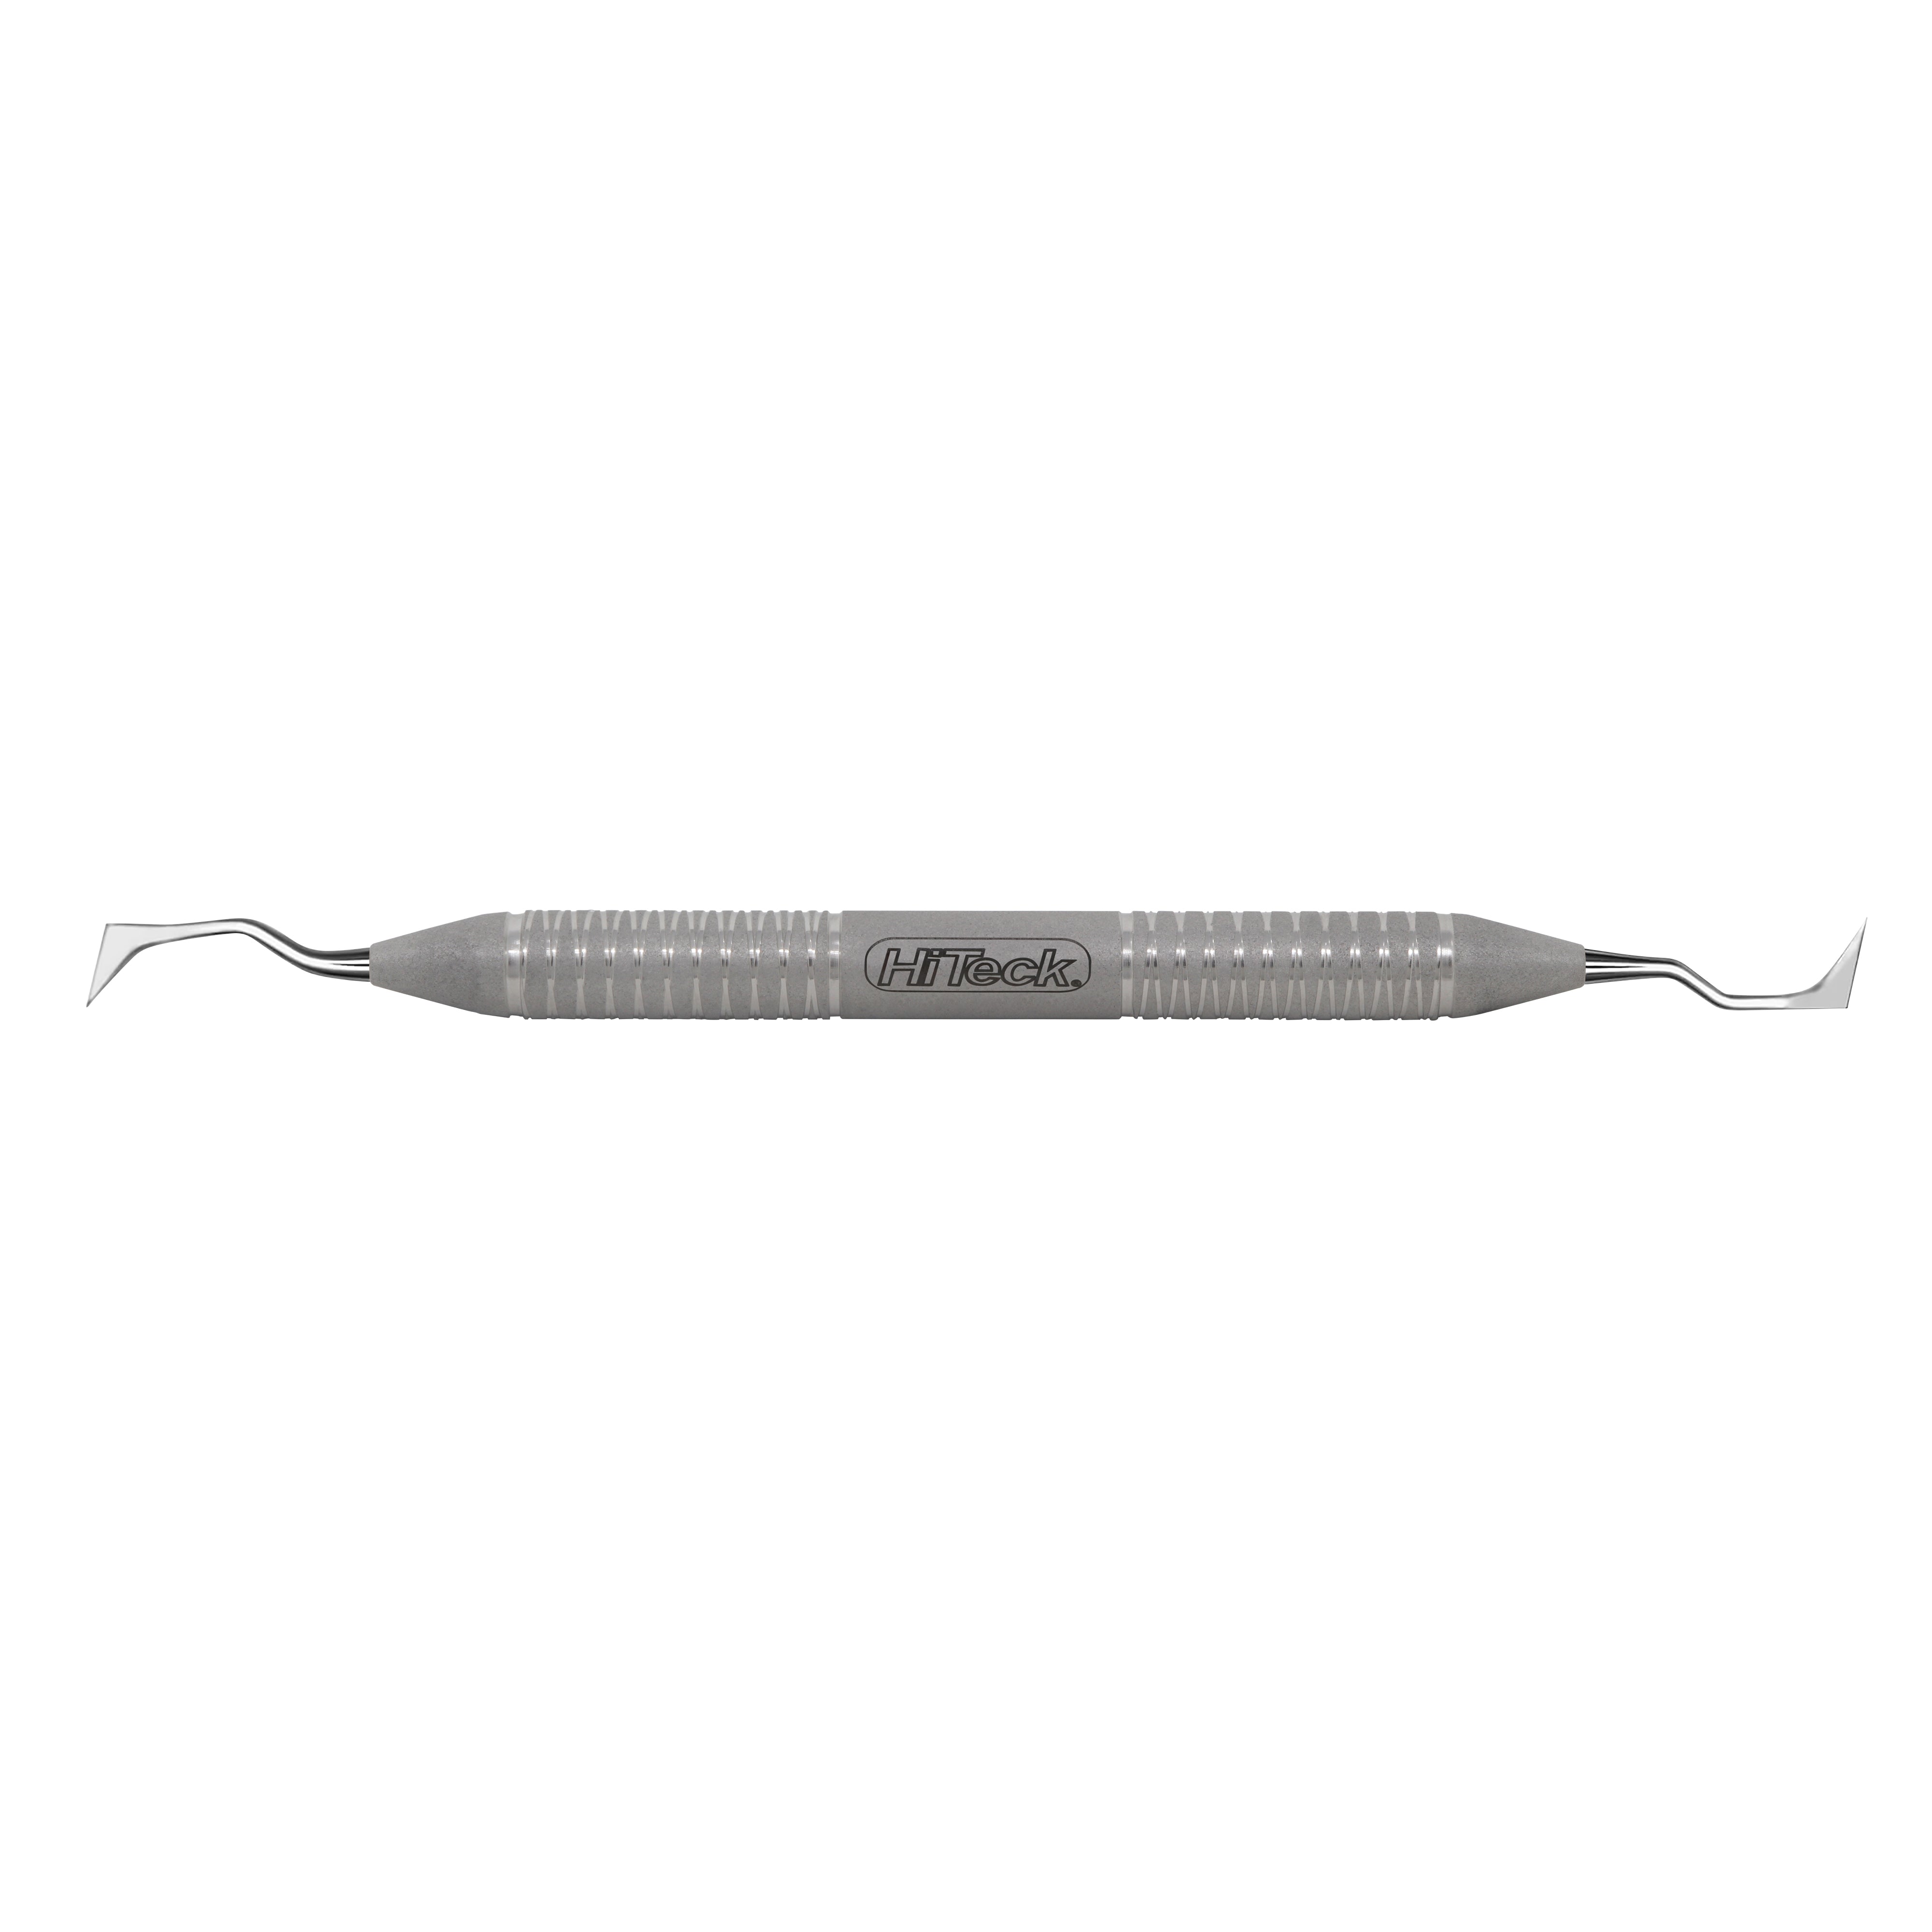 19/20 USC Towner Periodontal Knife - HiTeck Medical Instruments